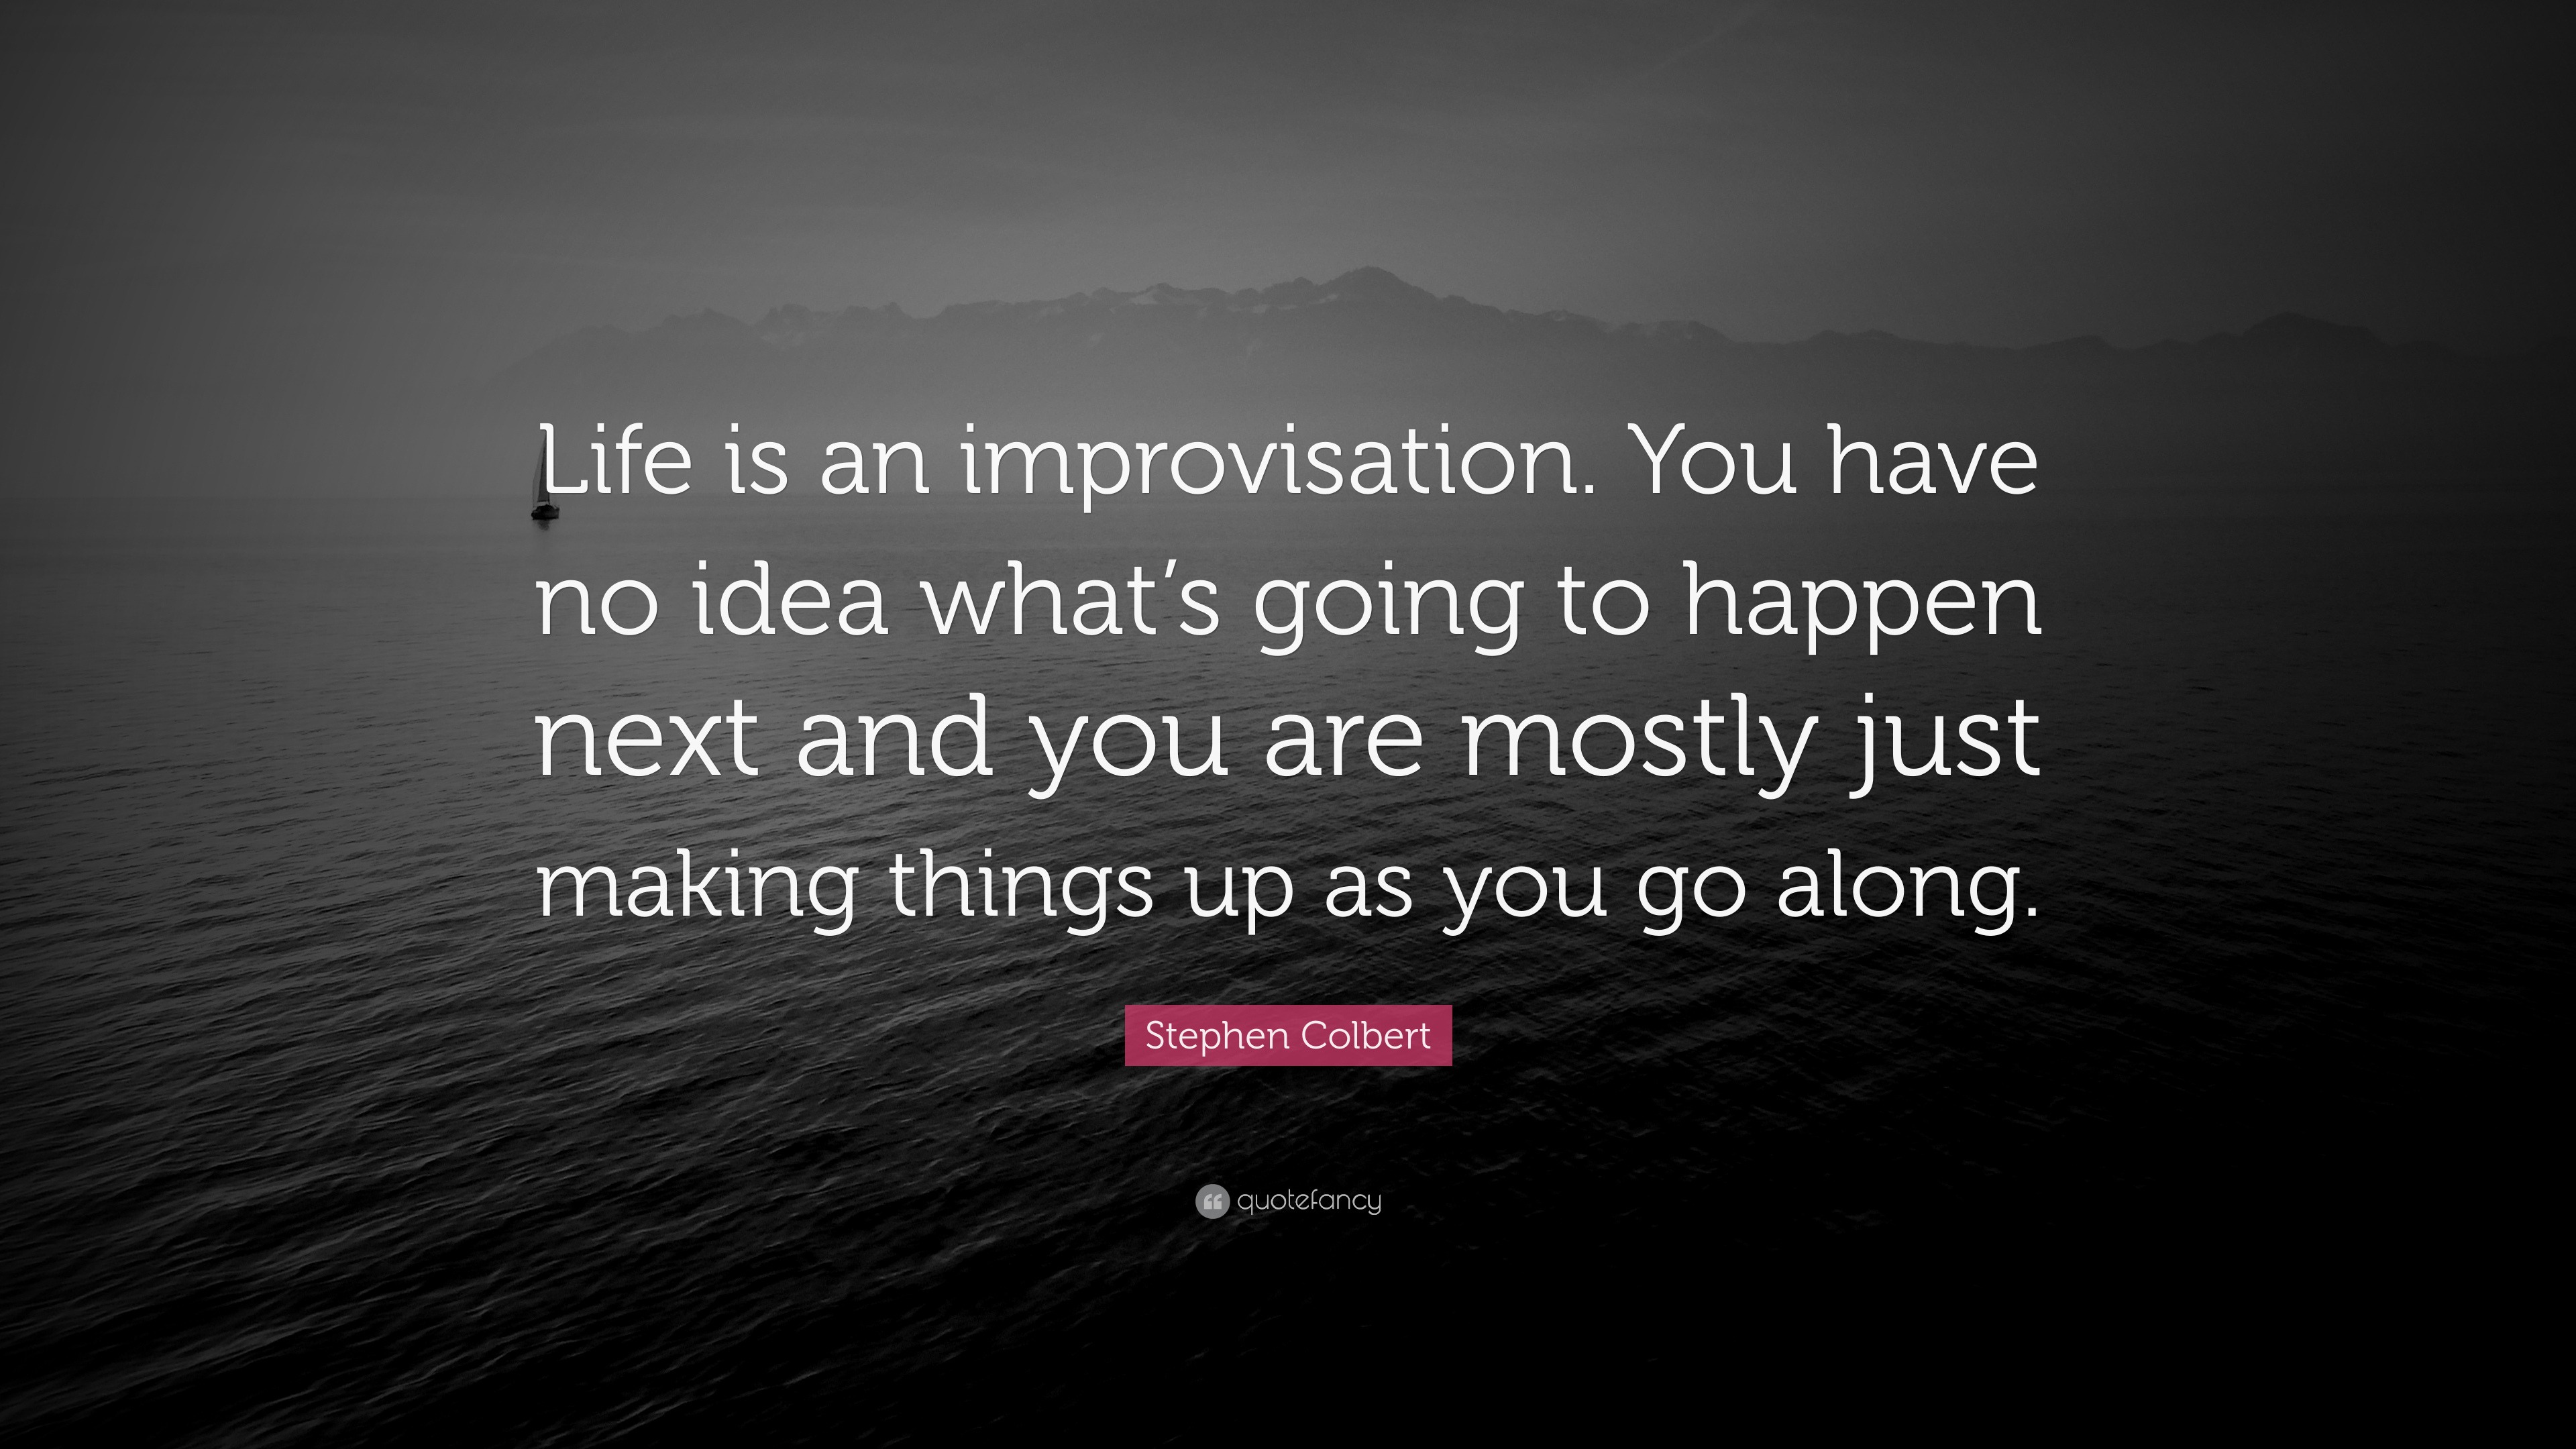 Stephen Colbert Quote: “Life is an improvisation. You have no idea what ...